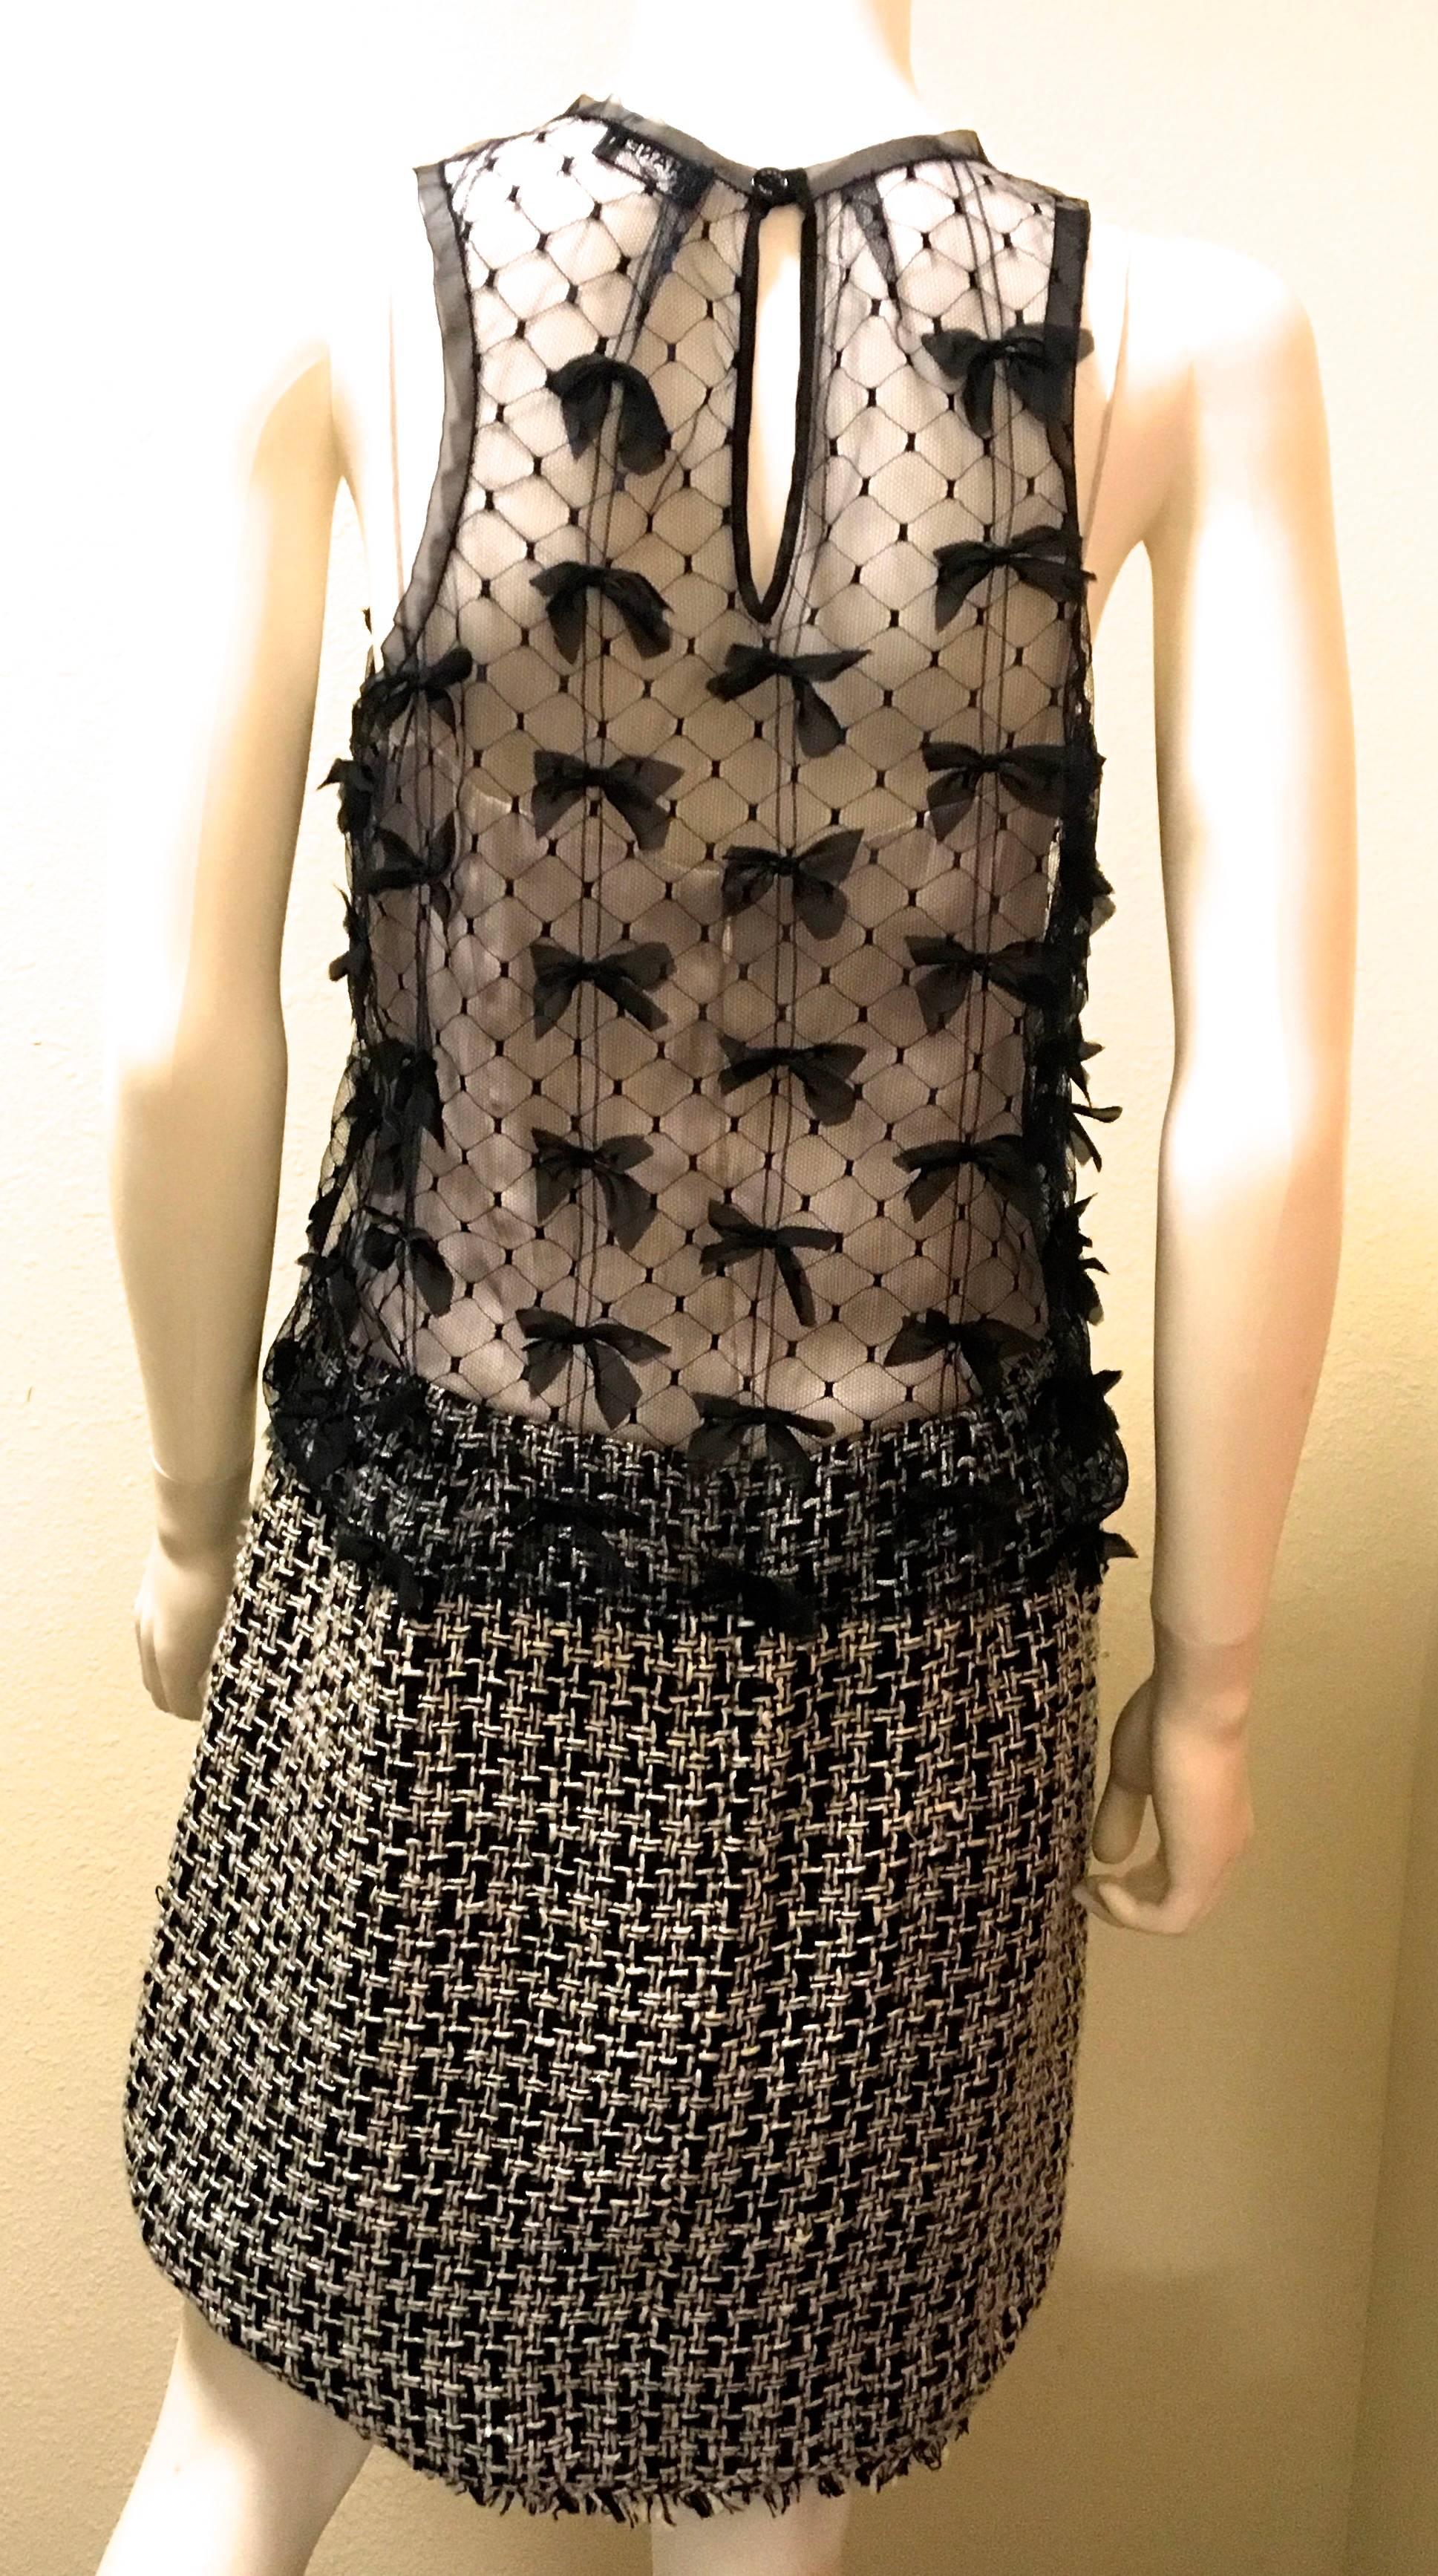 Presented here is a fabulous dress from Chanel. This fabulous dress is comprised of two layers: the underlying dress and the sheer nylon overlay that is worn outside the other dress. The underlying dress is made of 100% silk from the waist up. From